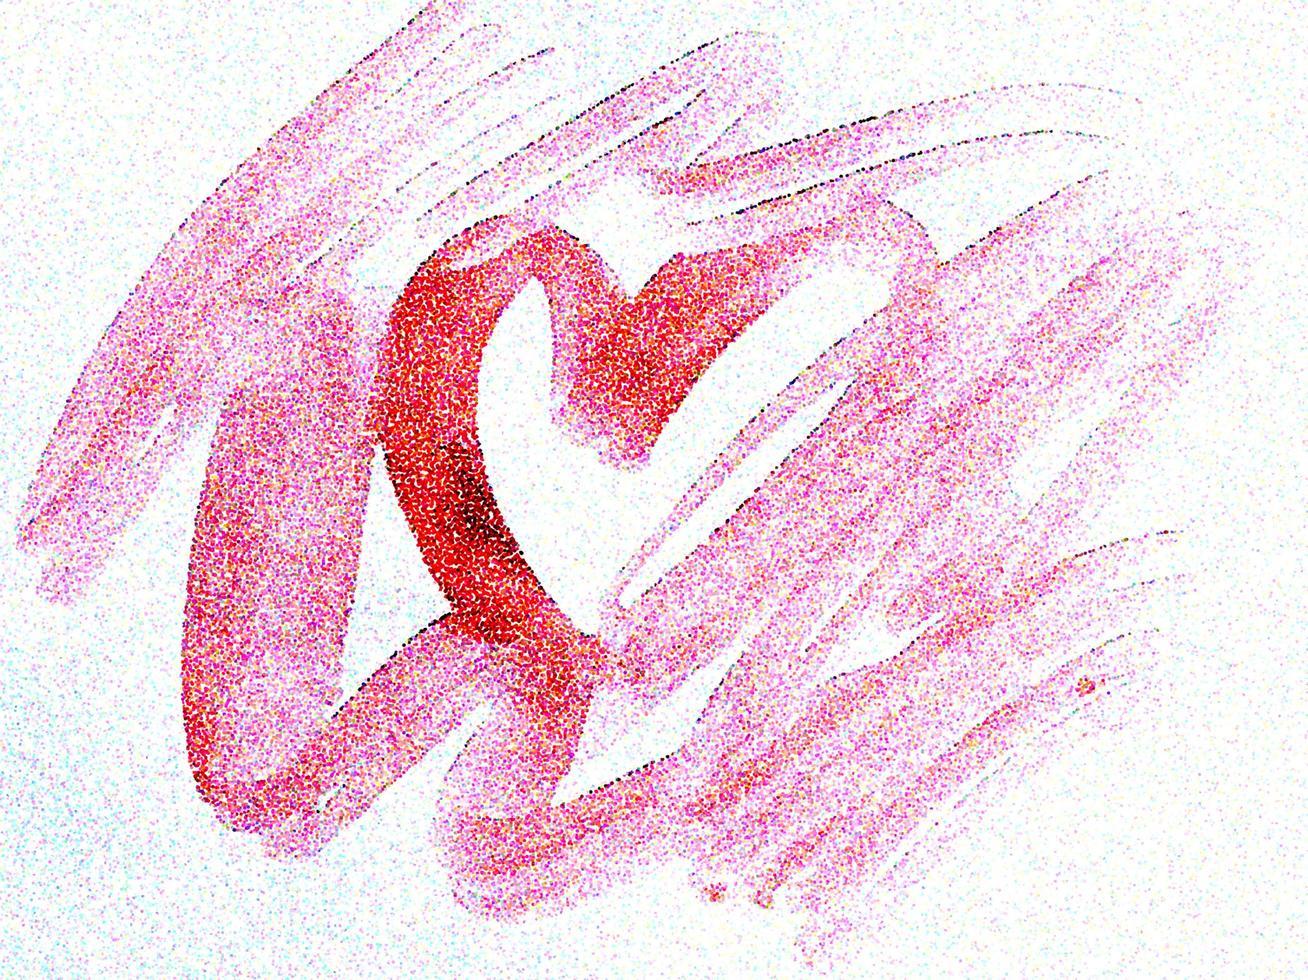 Abstract heart shape pink watercolor paint brush pattern on paper background. Splash ink stain red art wallpaper grunge effect concept photo